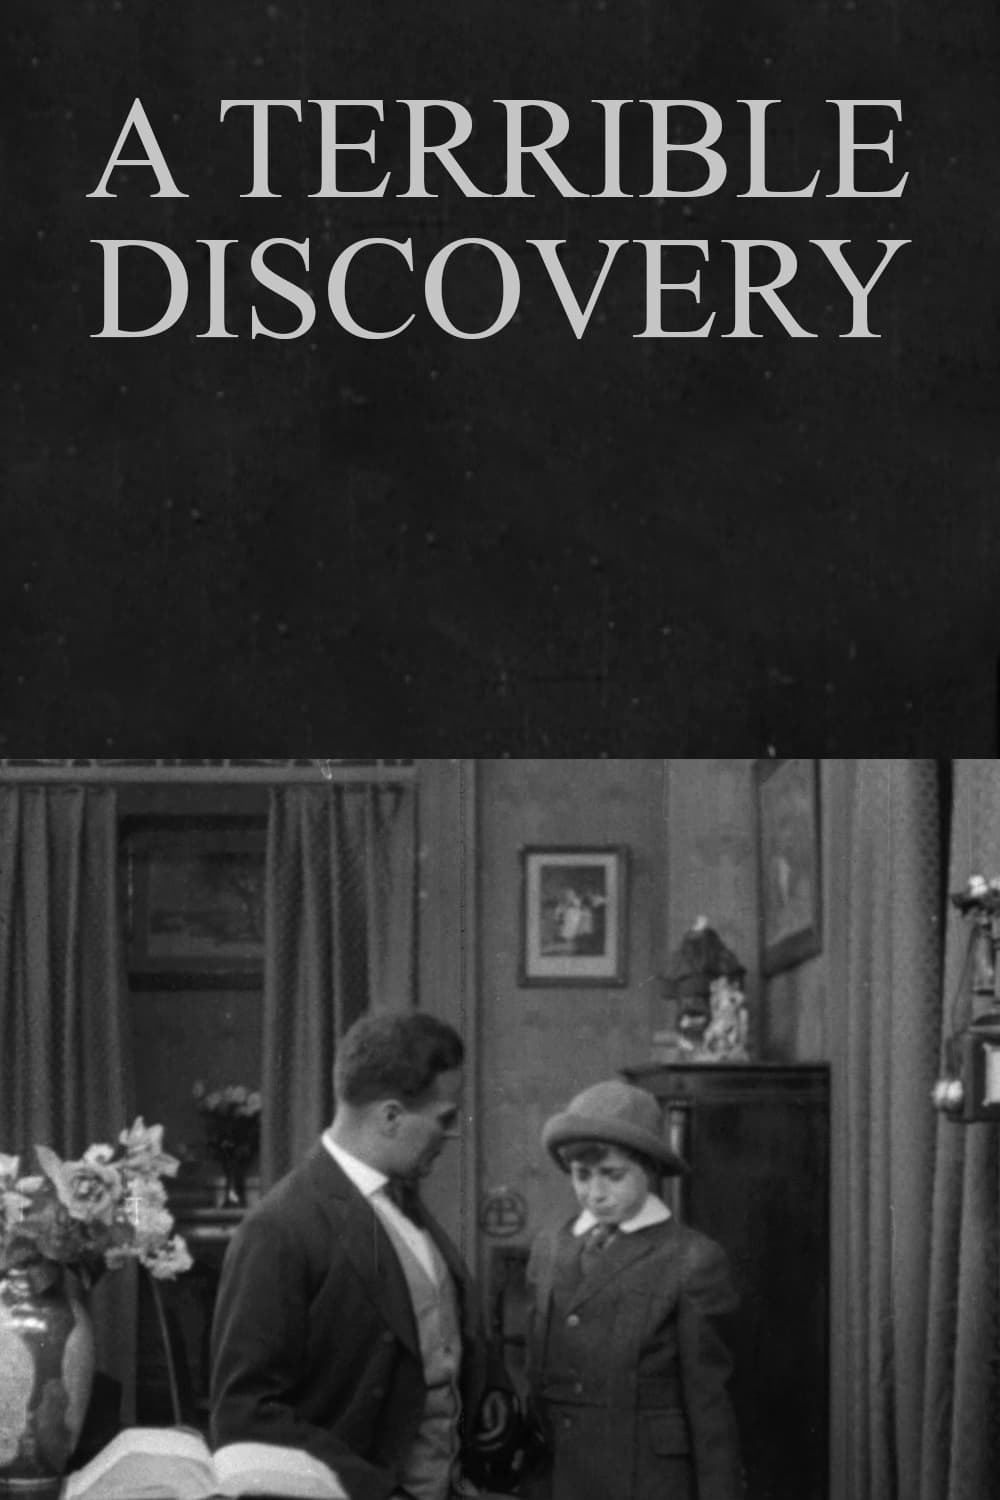 A Terrible Discovery